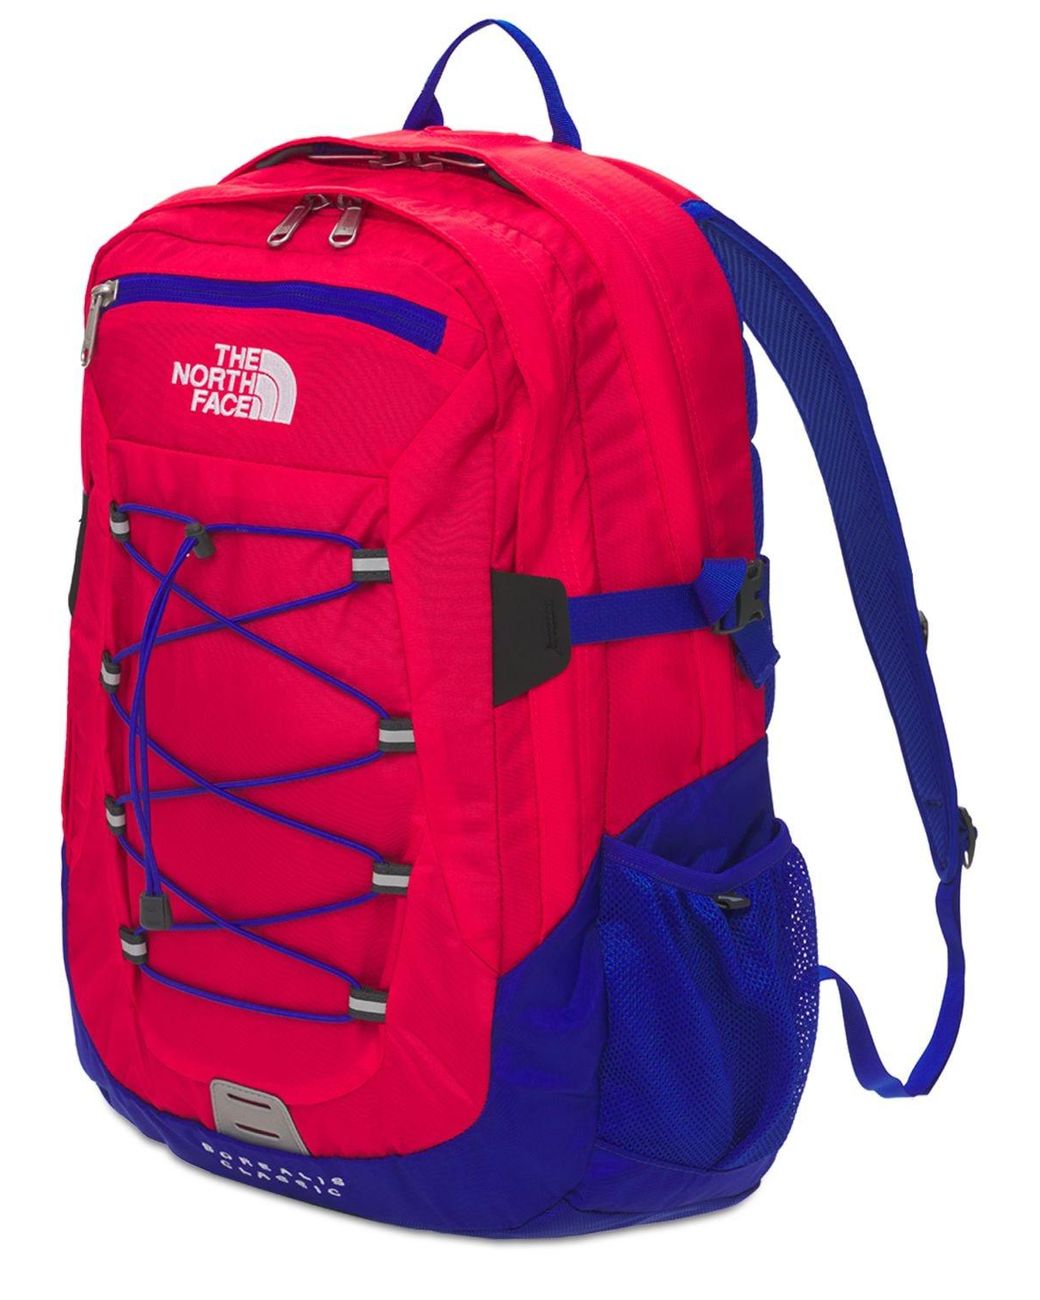 The North Face Borealis Classic Backpack in Red/Blue (Red) | Lyst